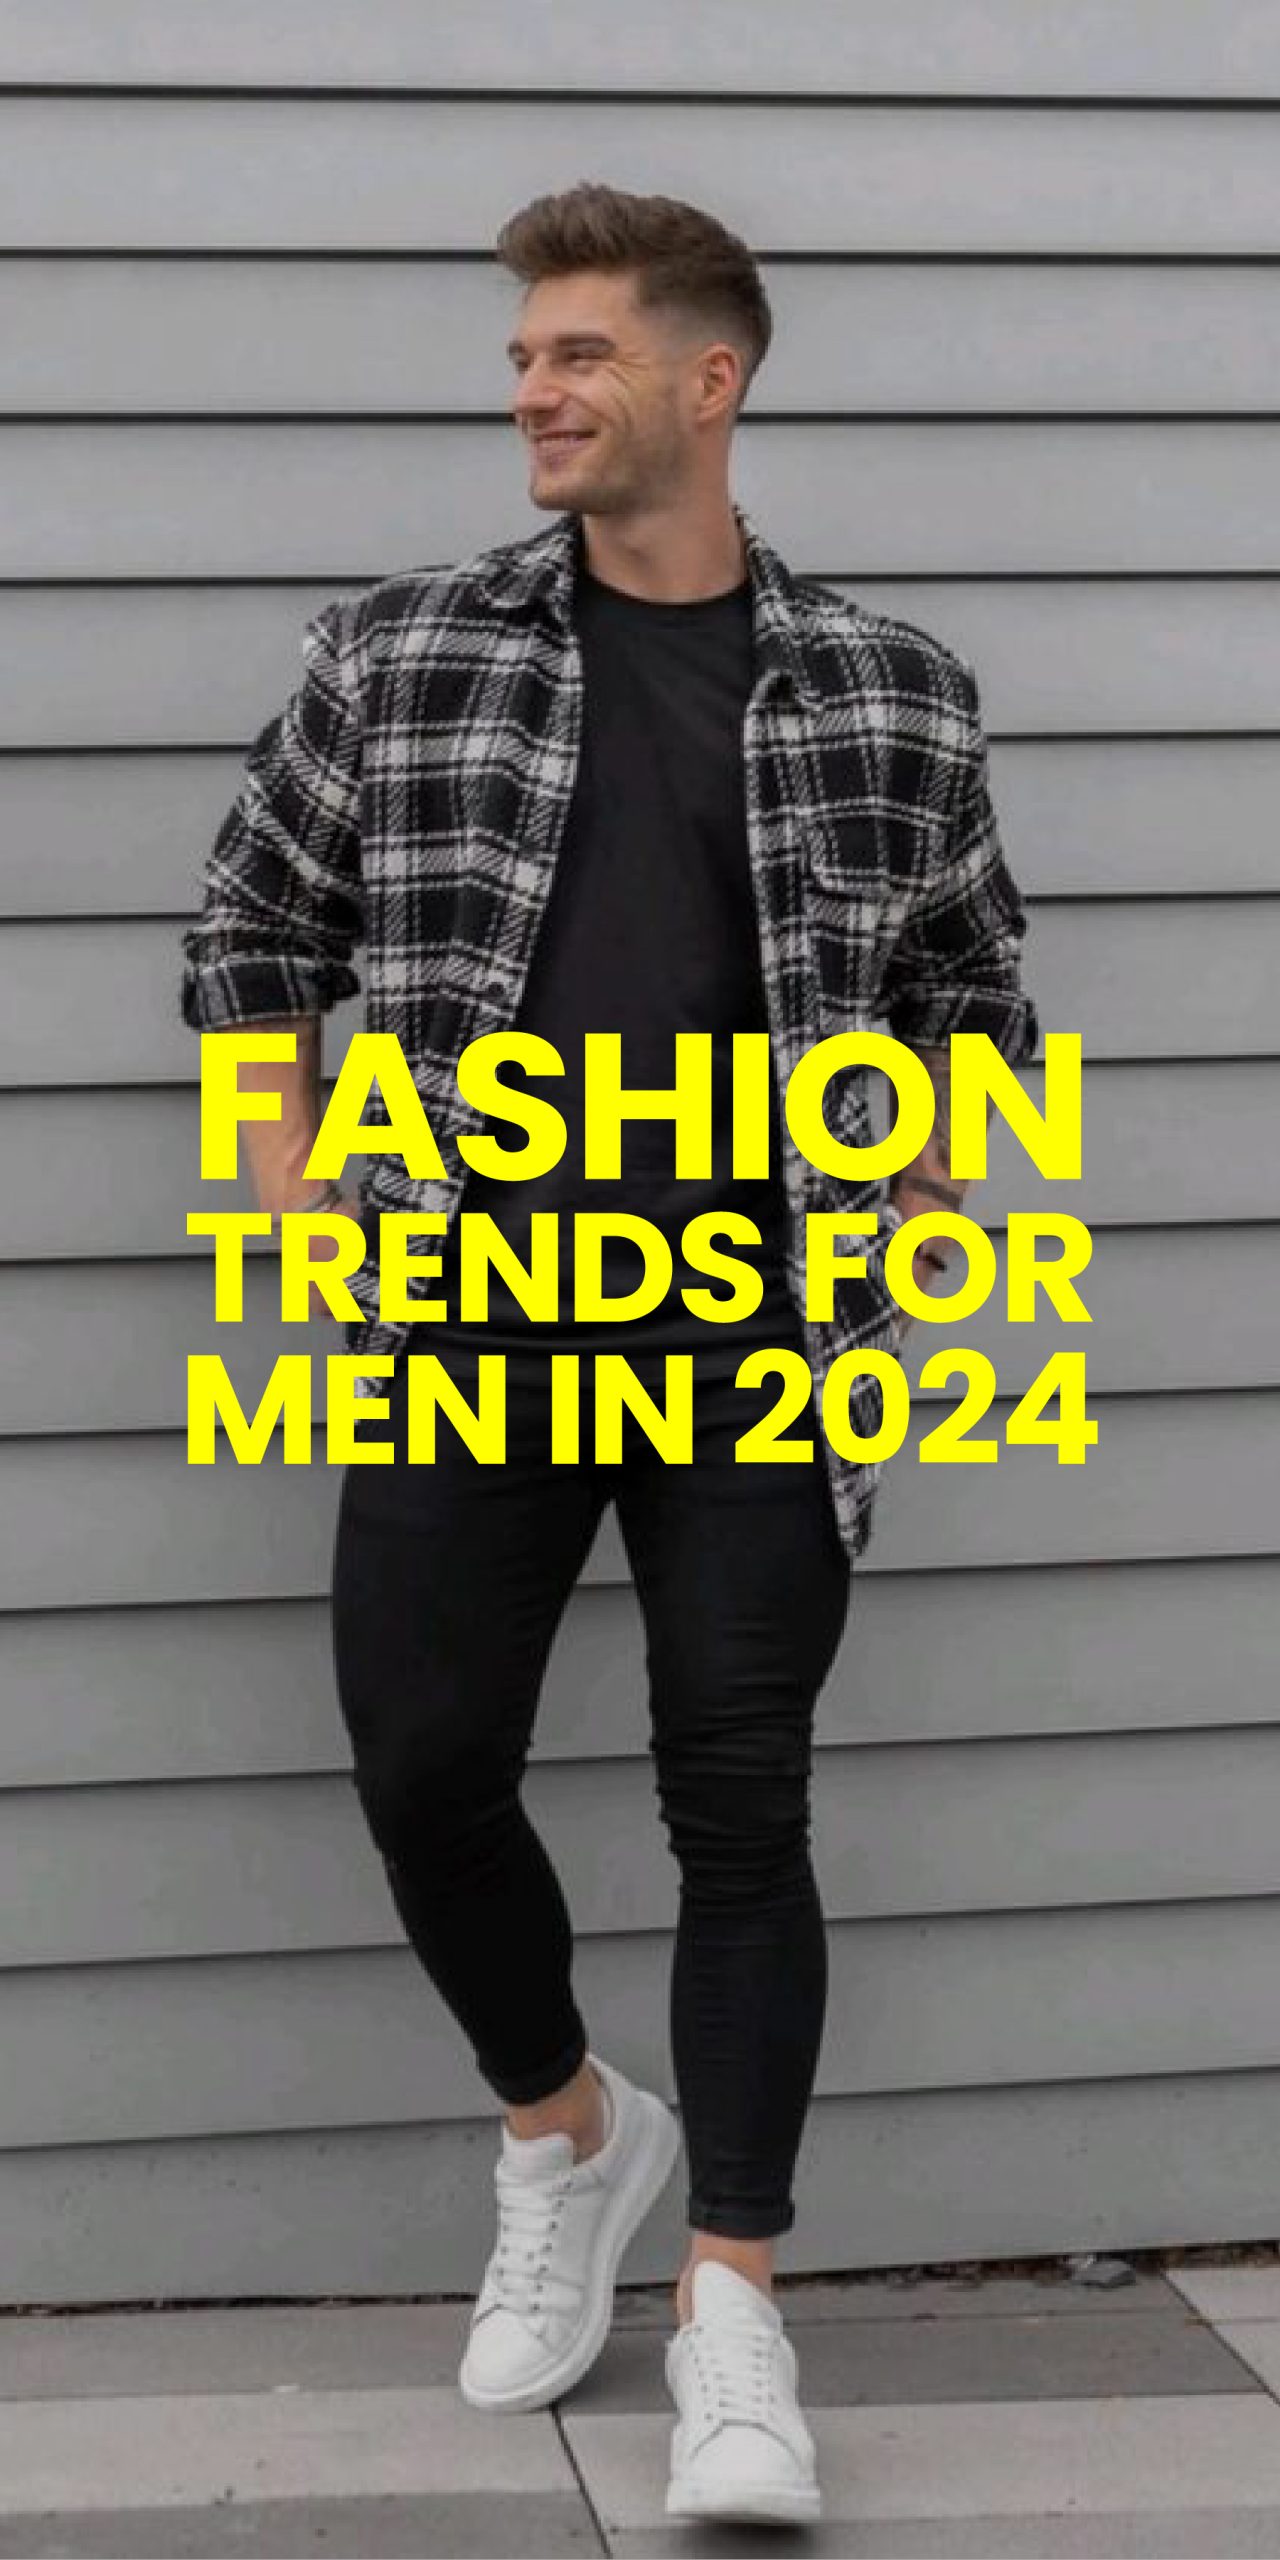 FASHION TRENDS FOR MEN IN 2024